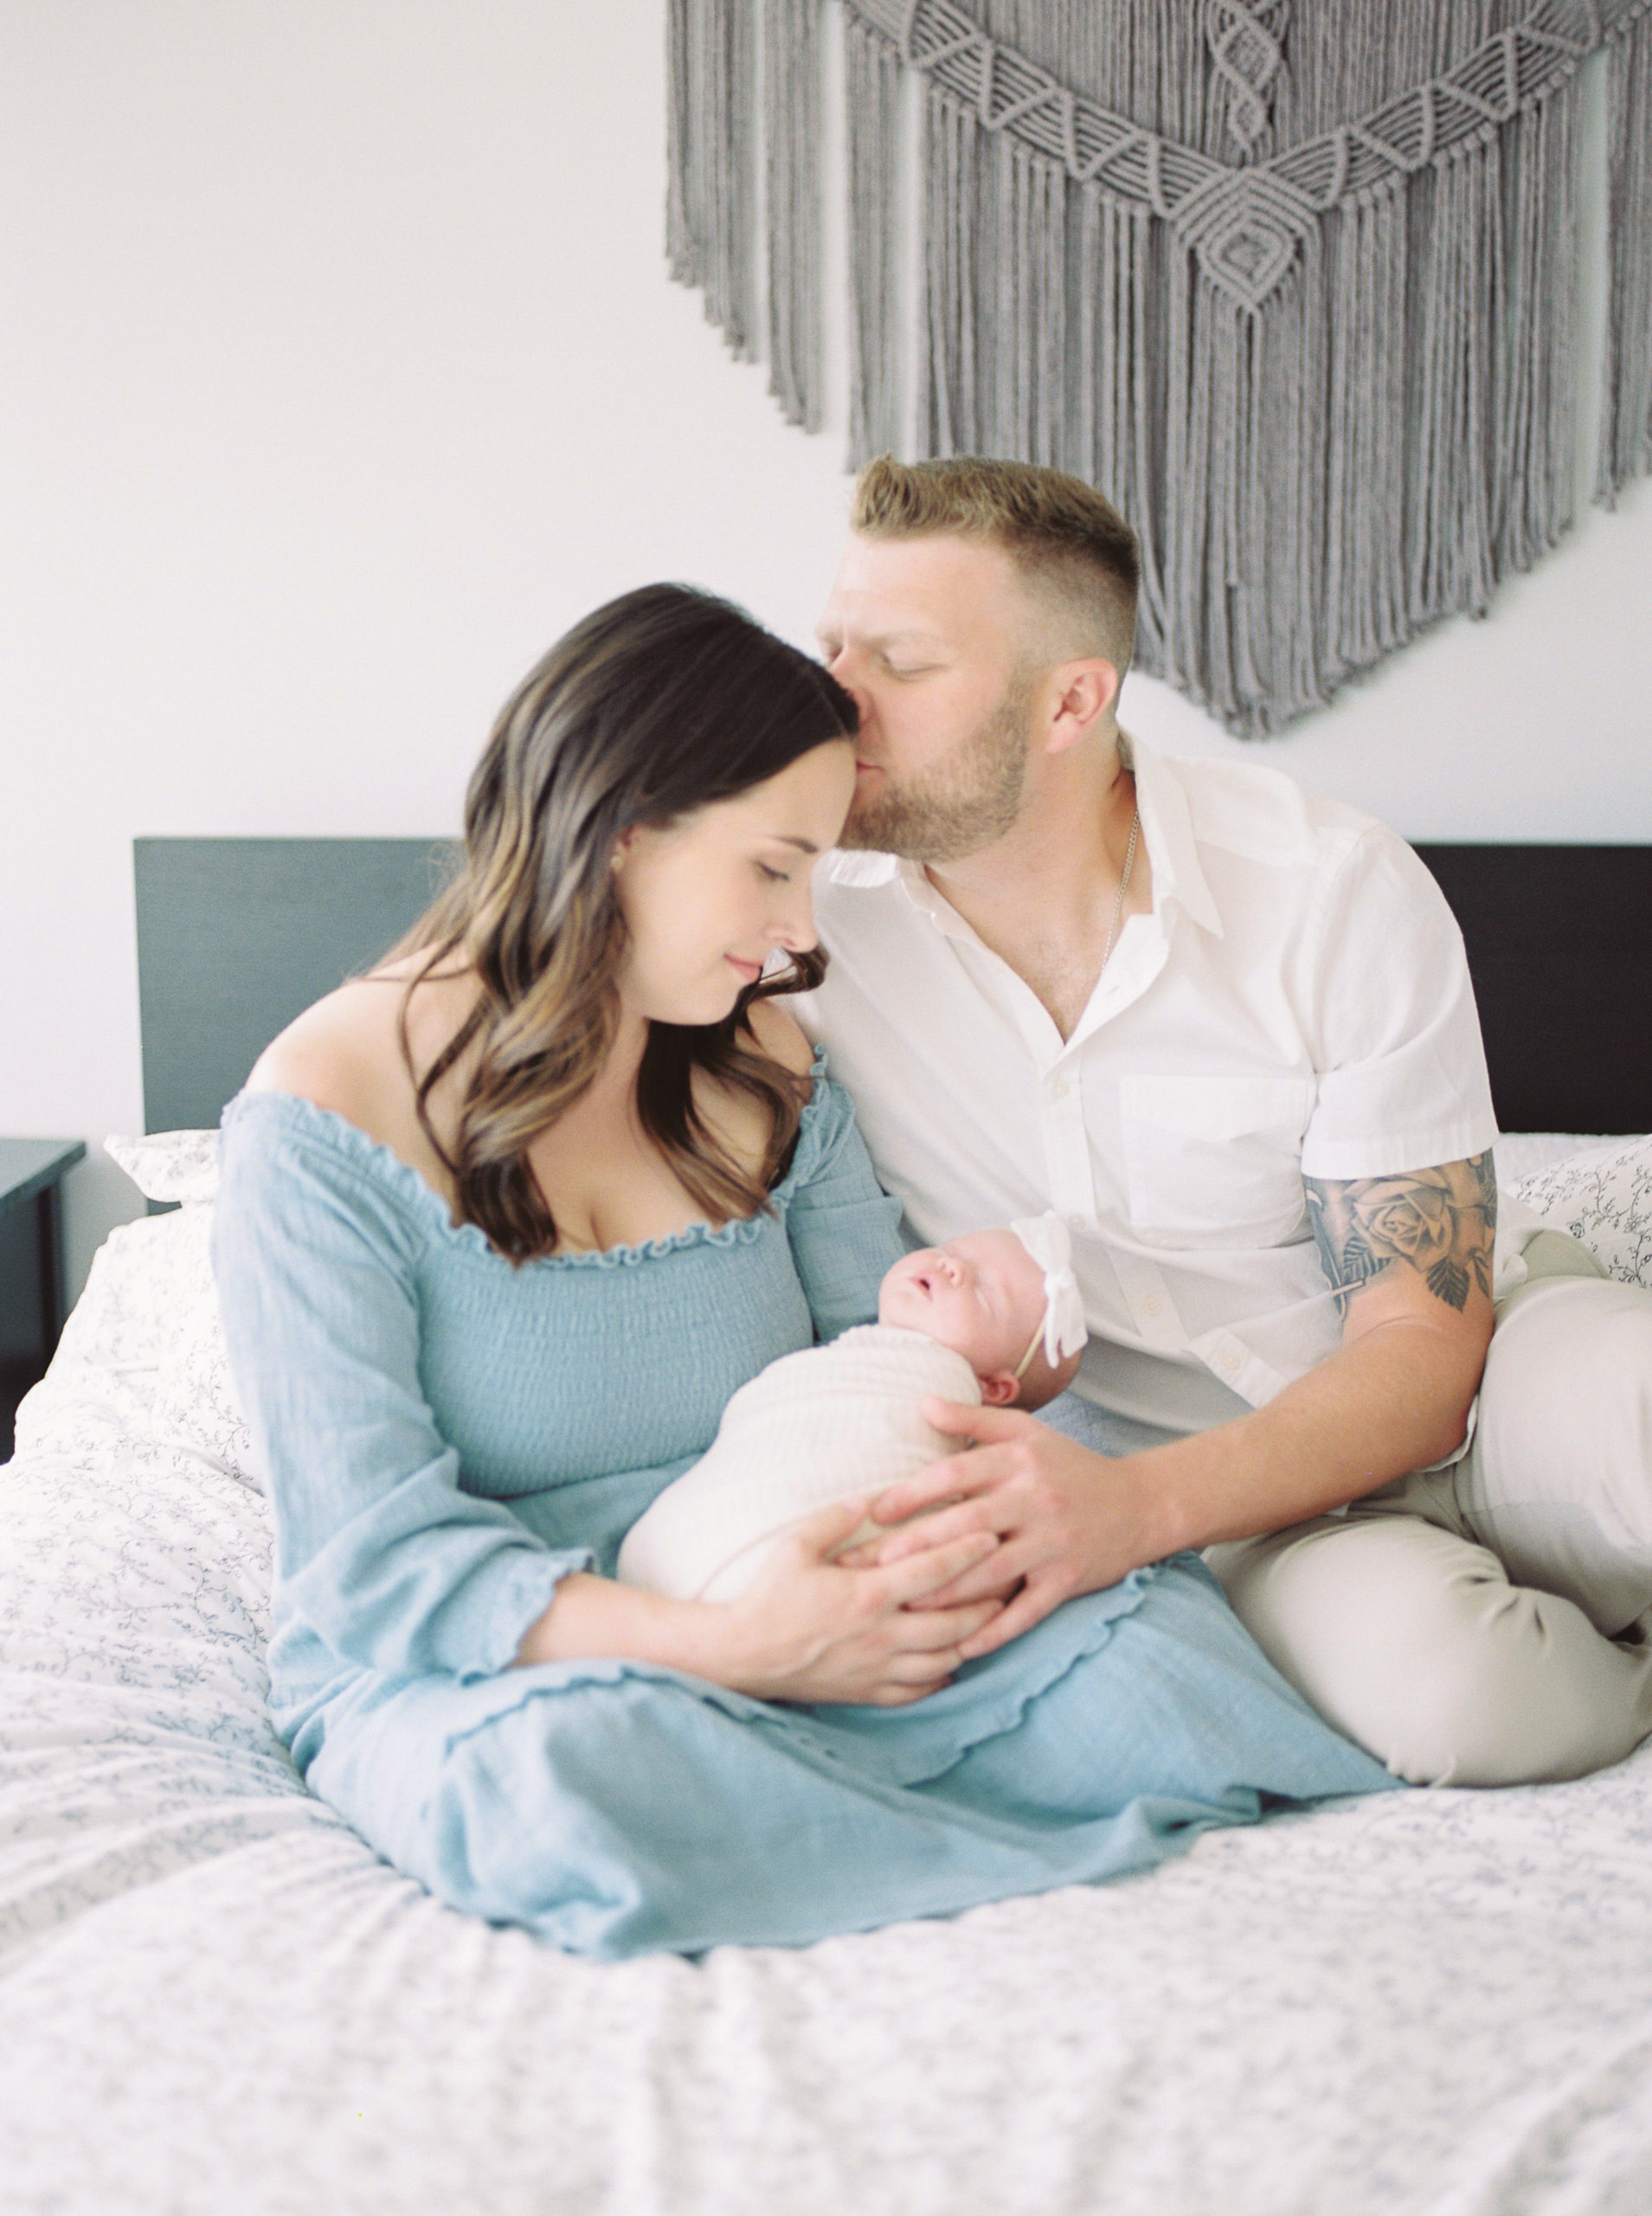 Natural light image of parents and newborn baby captured on film by Kahla Kristen Photography